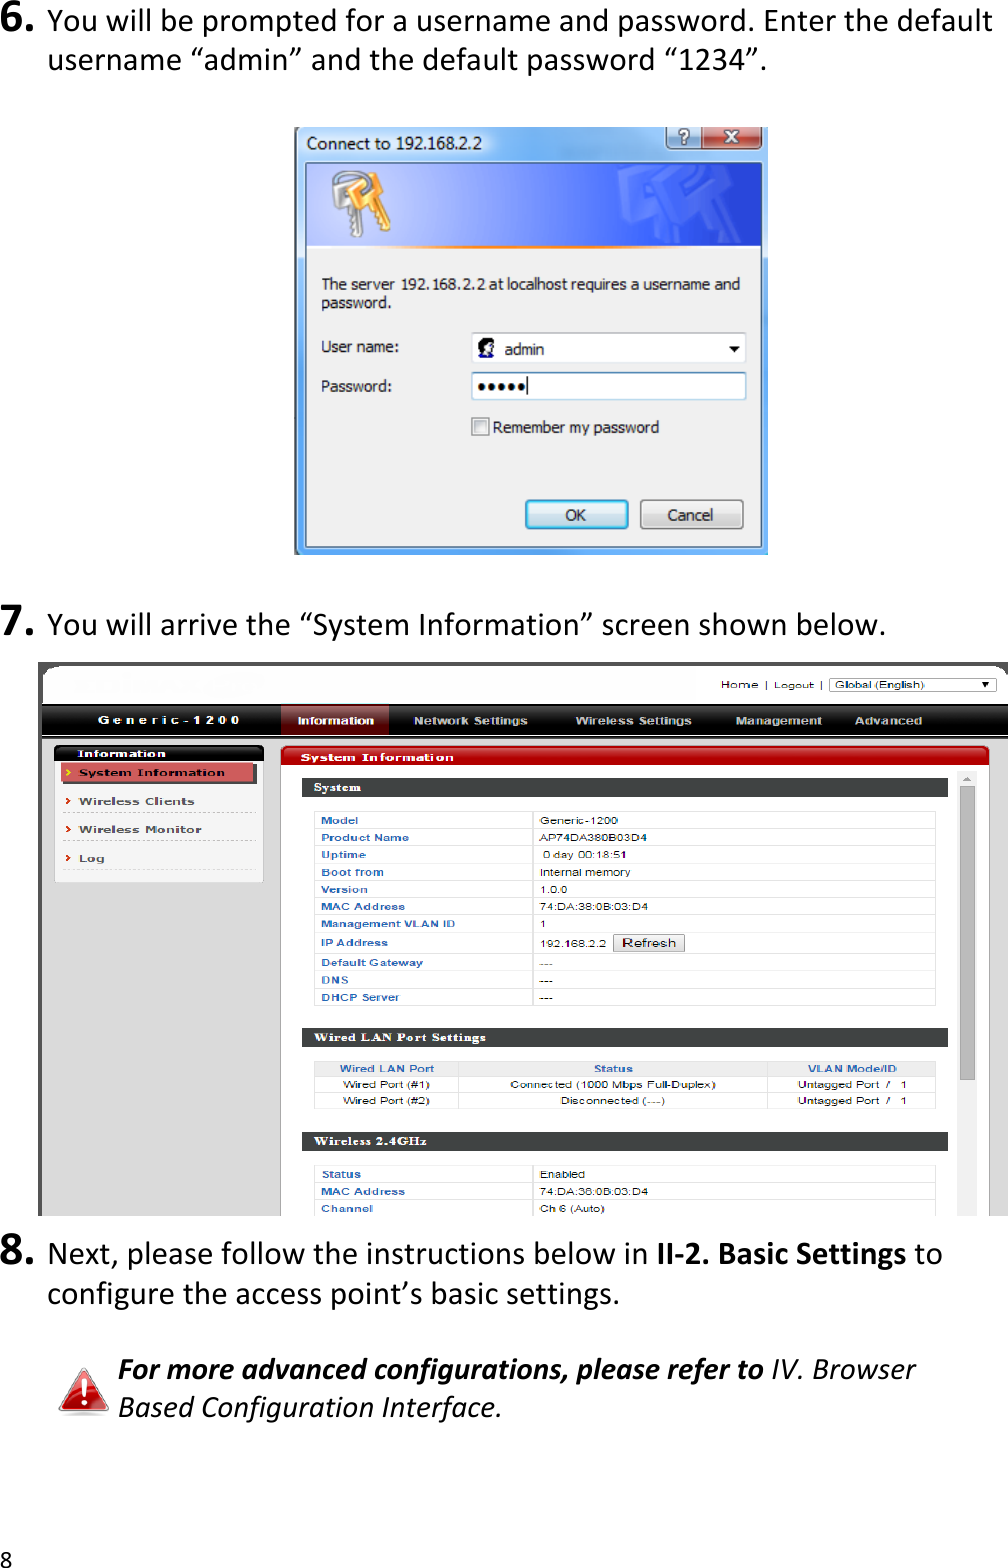 8  6. You will be prompted for a username and password. Enter the default username “admin” and the default password “1234”.    7. You will arrive the “System Information” screen shown below.   8. Next, please follow the instructions below in II-2. Basic Settings to configure the access point’s basic settings.  For more advanced configurations, please refer to IV. Browser Based Configuration Interface.  